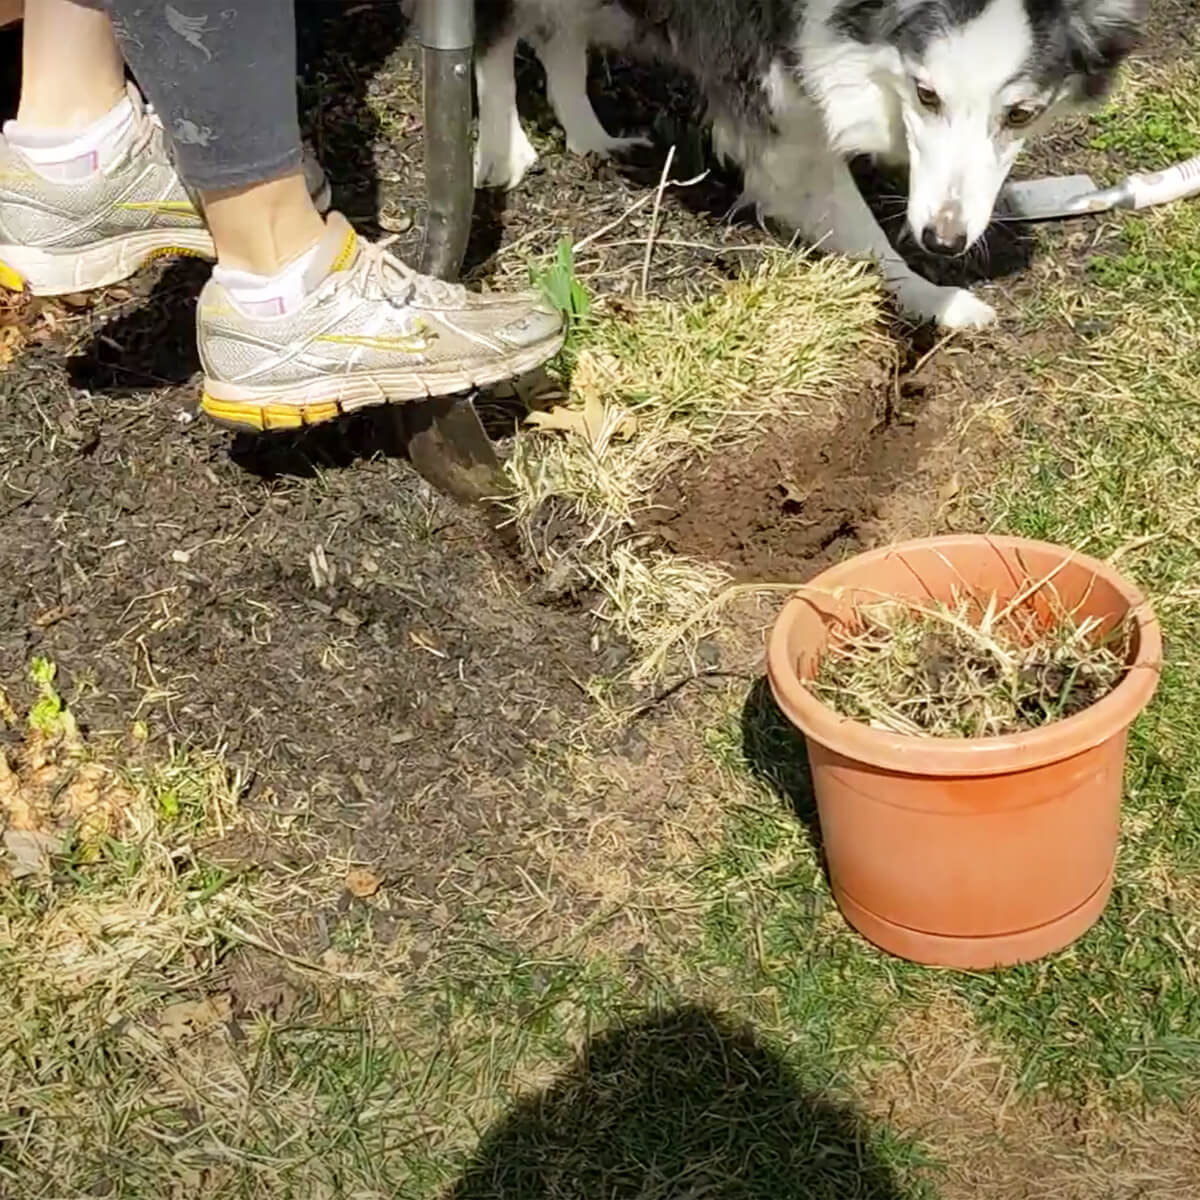 Digging up daffodils for dividing and transplanting